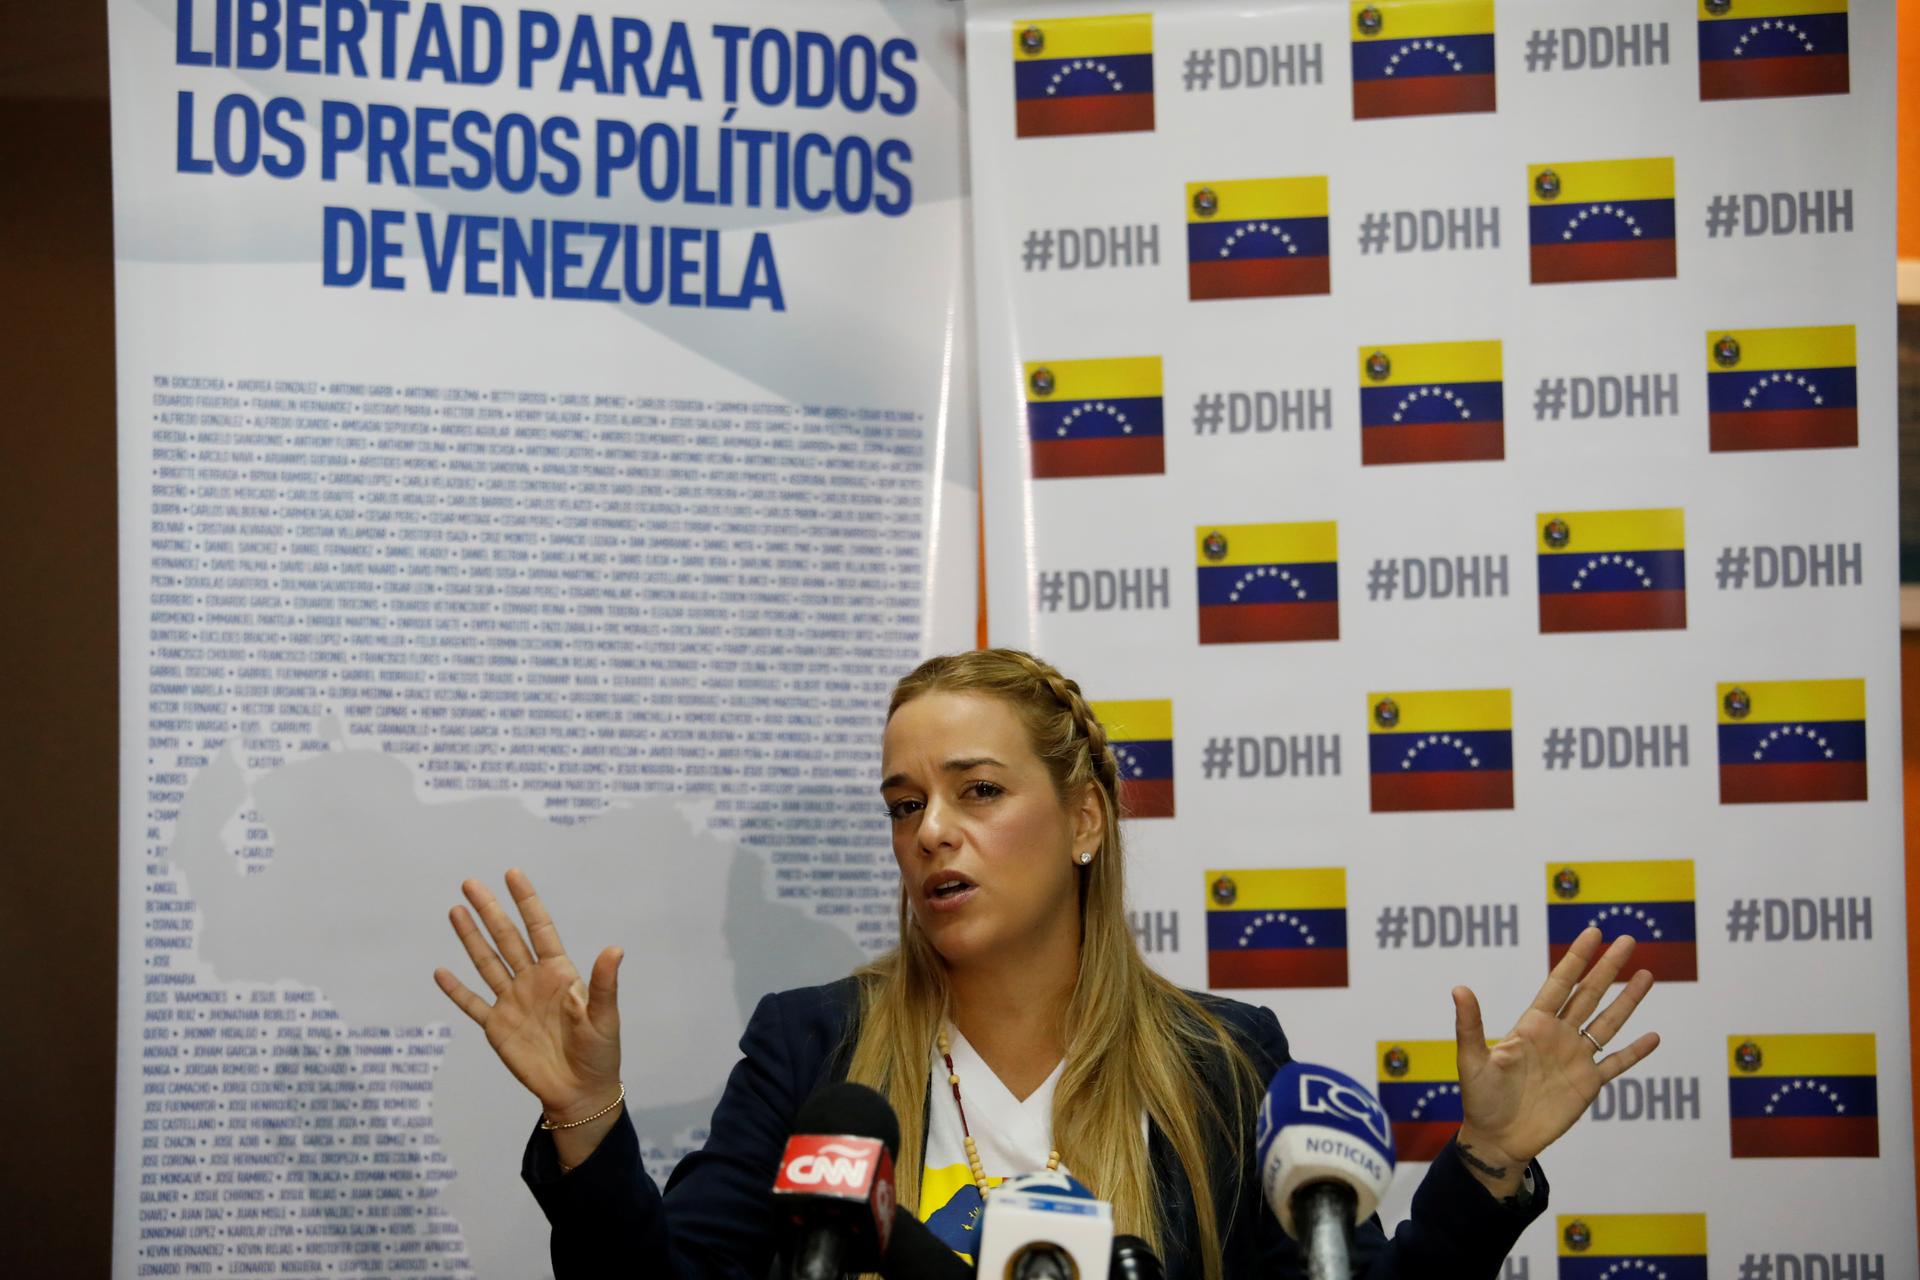 A blonde Lilian Tintori, speaks during a meeting with a banner in the background that reads: "Freedom for all the political prisoners in Venezuela." 